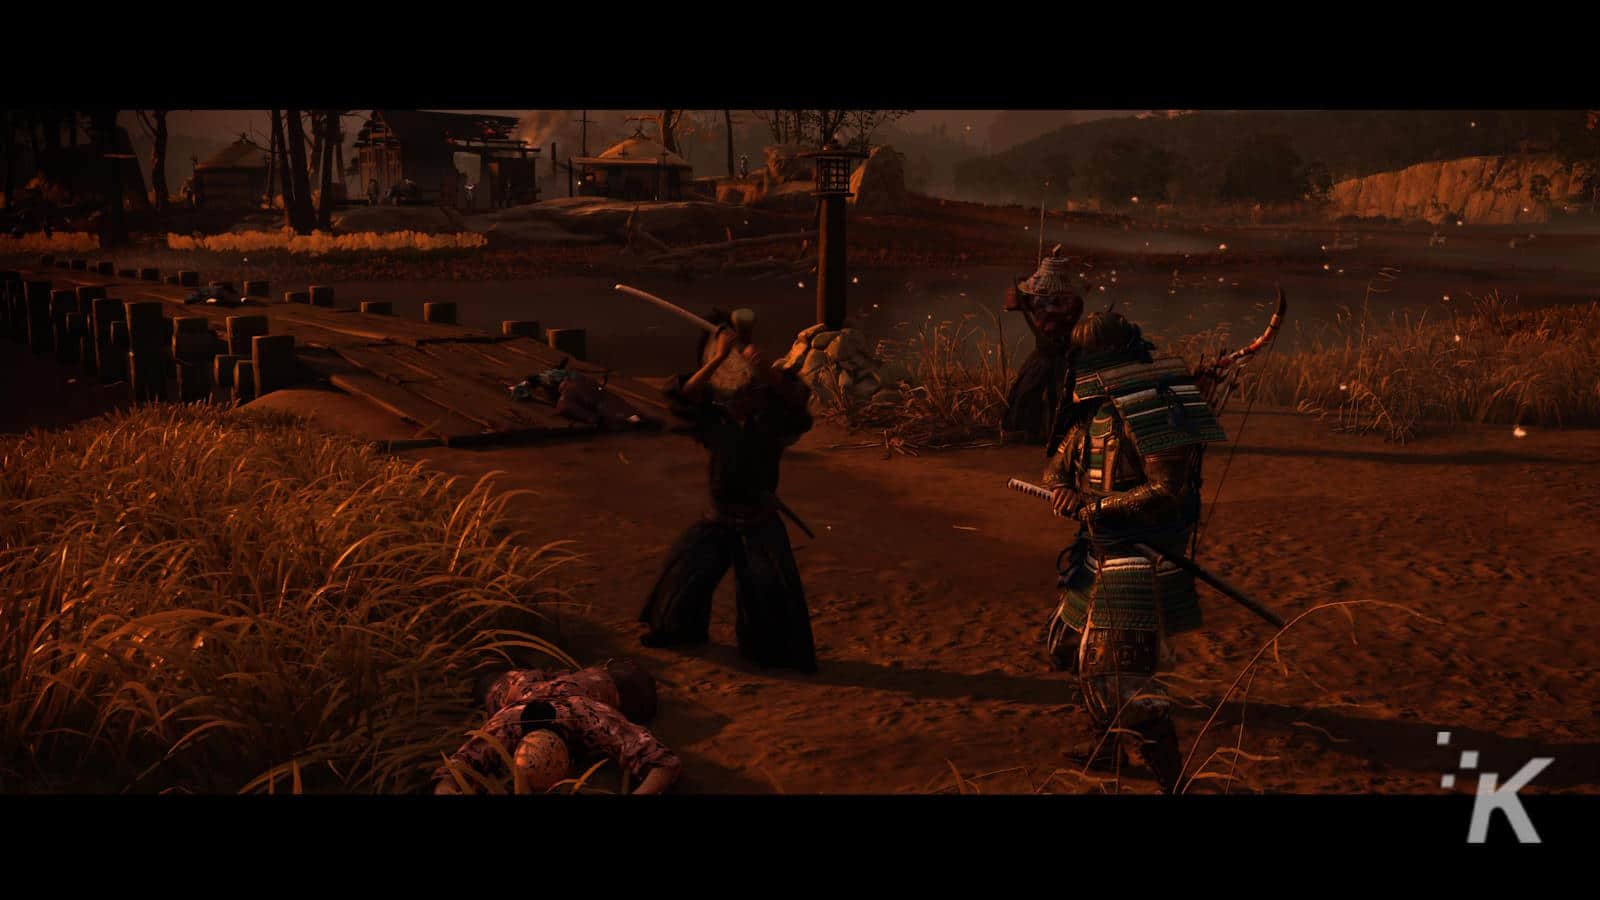 Two samurai warriors engaged in combat with swords on a dimly lit battlefield, surrounded by tall grass and traditional japanese structures, with a body lying on the ground and a calm river in the background.